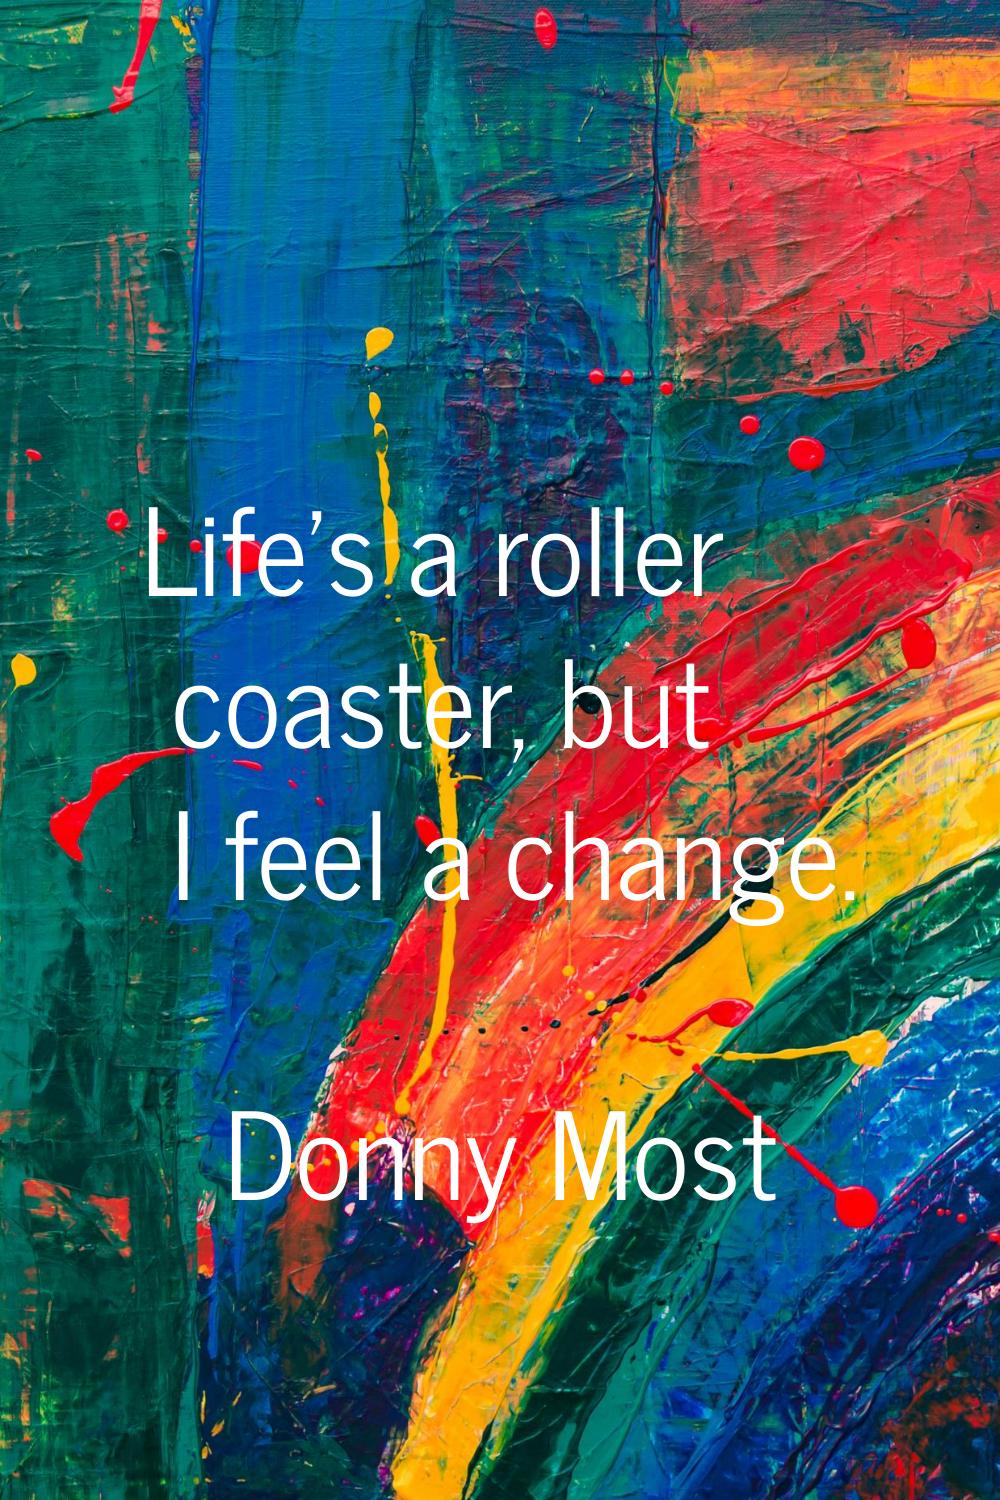 Life's a roller coaster, but I feel a change.